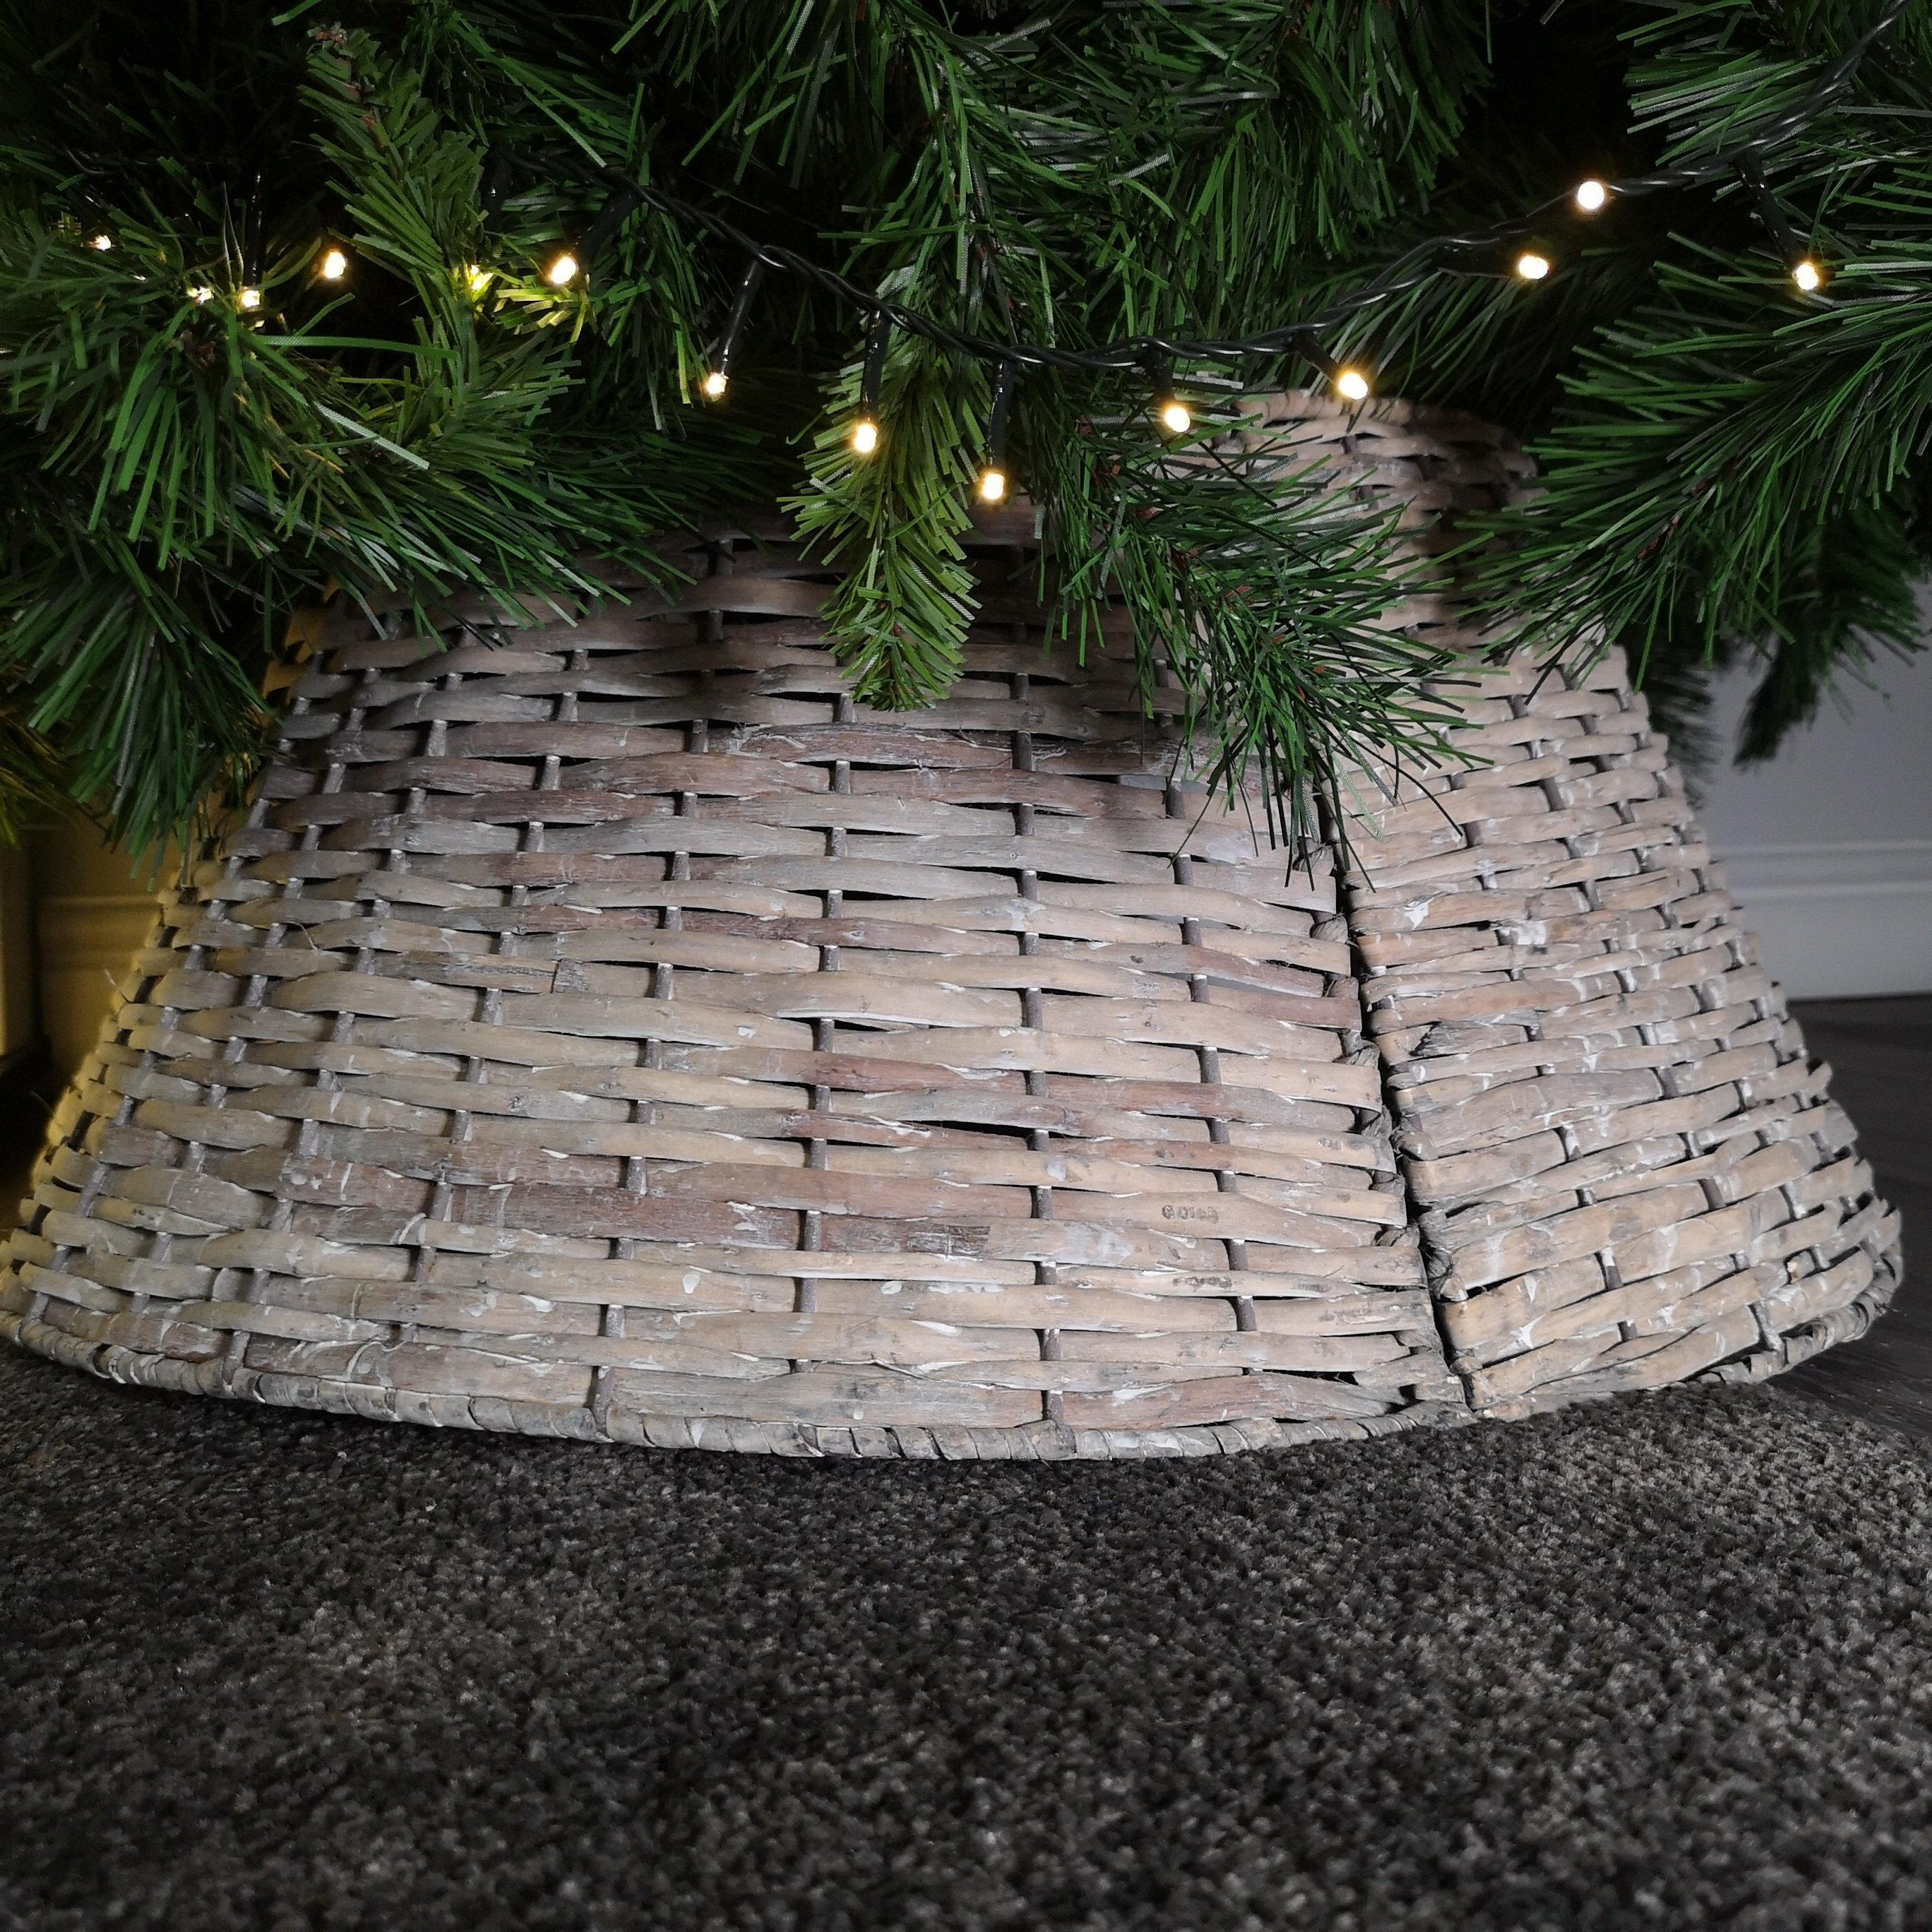 28/70cm Everlands KD Willow Christmas Tree Skirt Wicker Rattan - Large Grey Wash - image 1